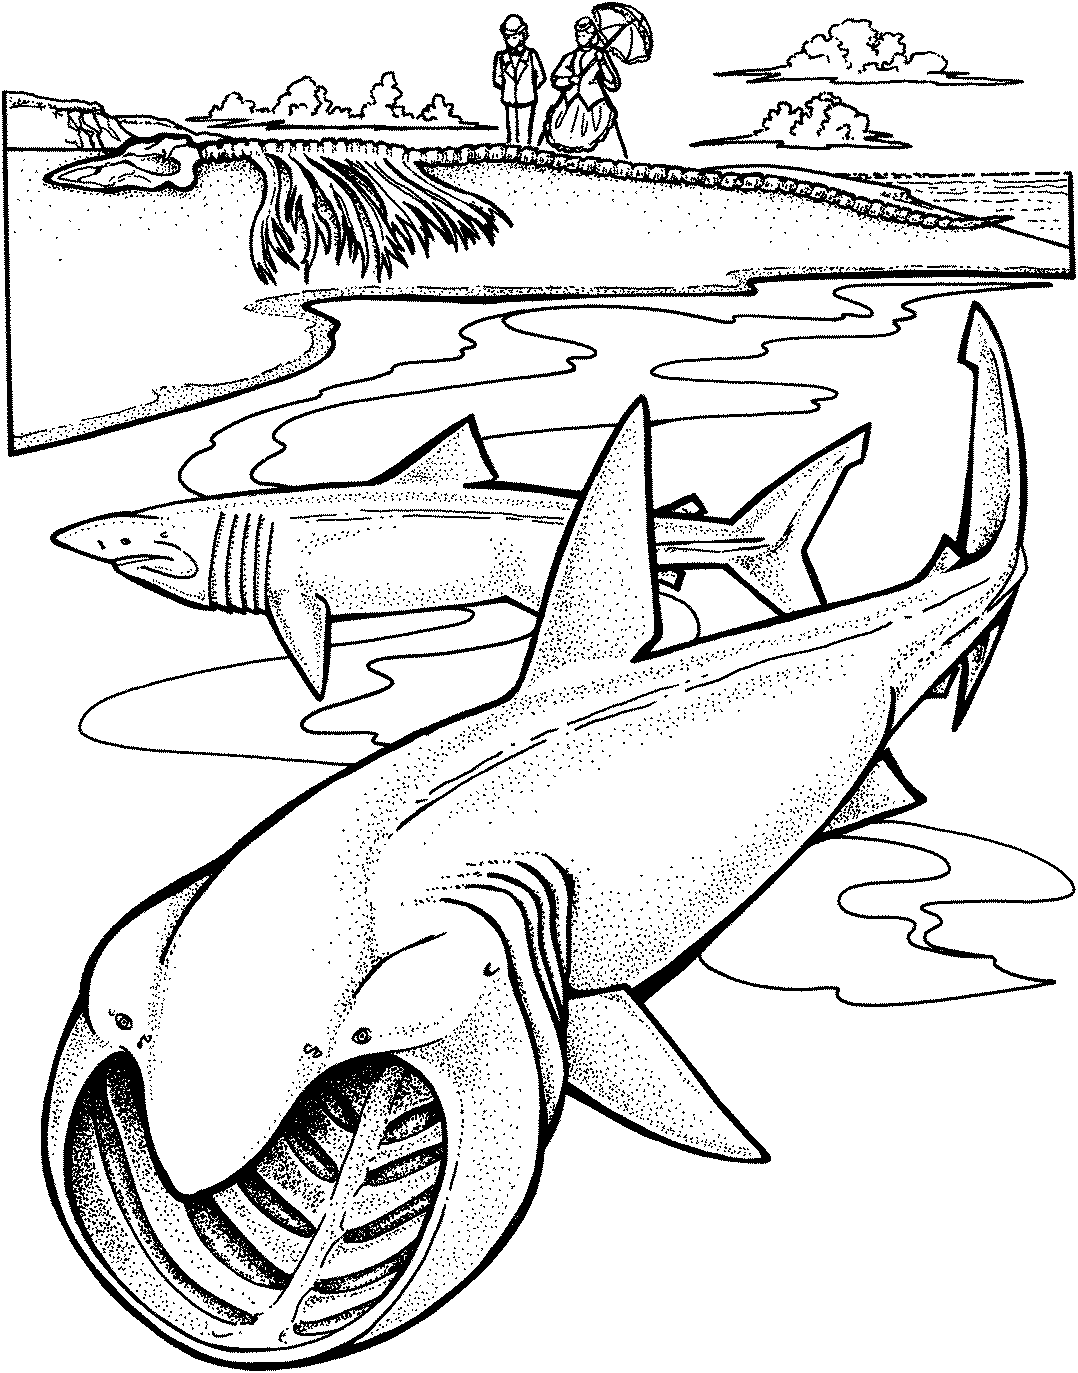 Big Mouth Shark Coloring Page